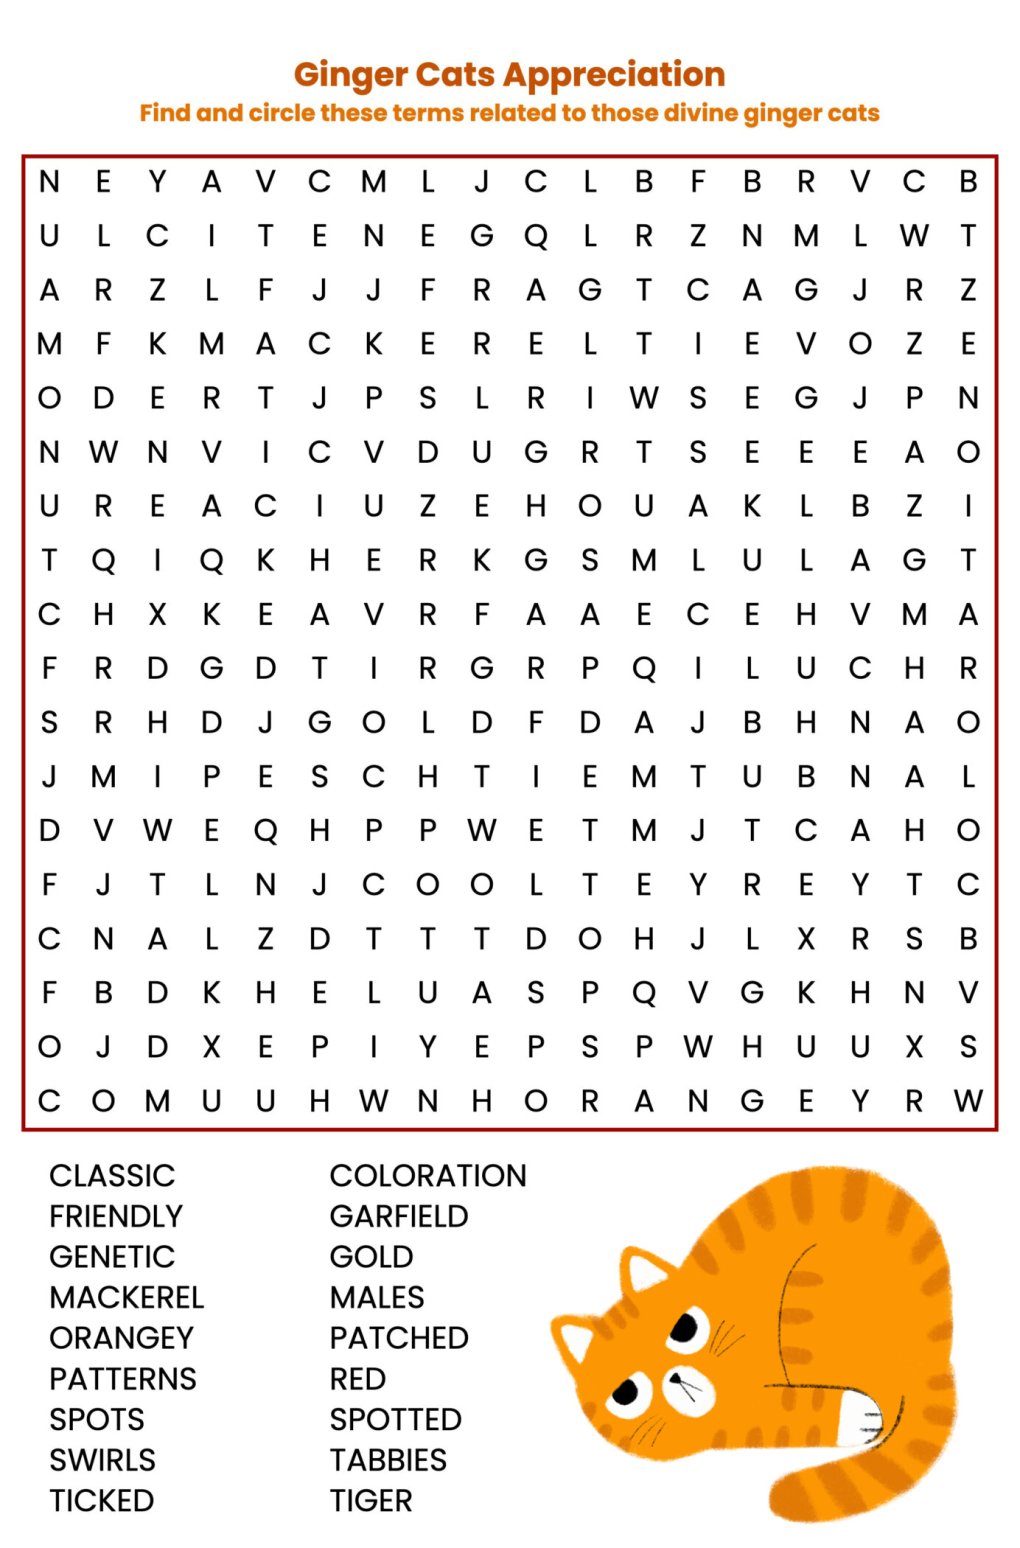 Cat Puzzle: Find Ginger Cat Words in this Printable Grid